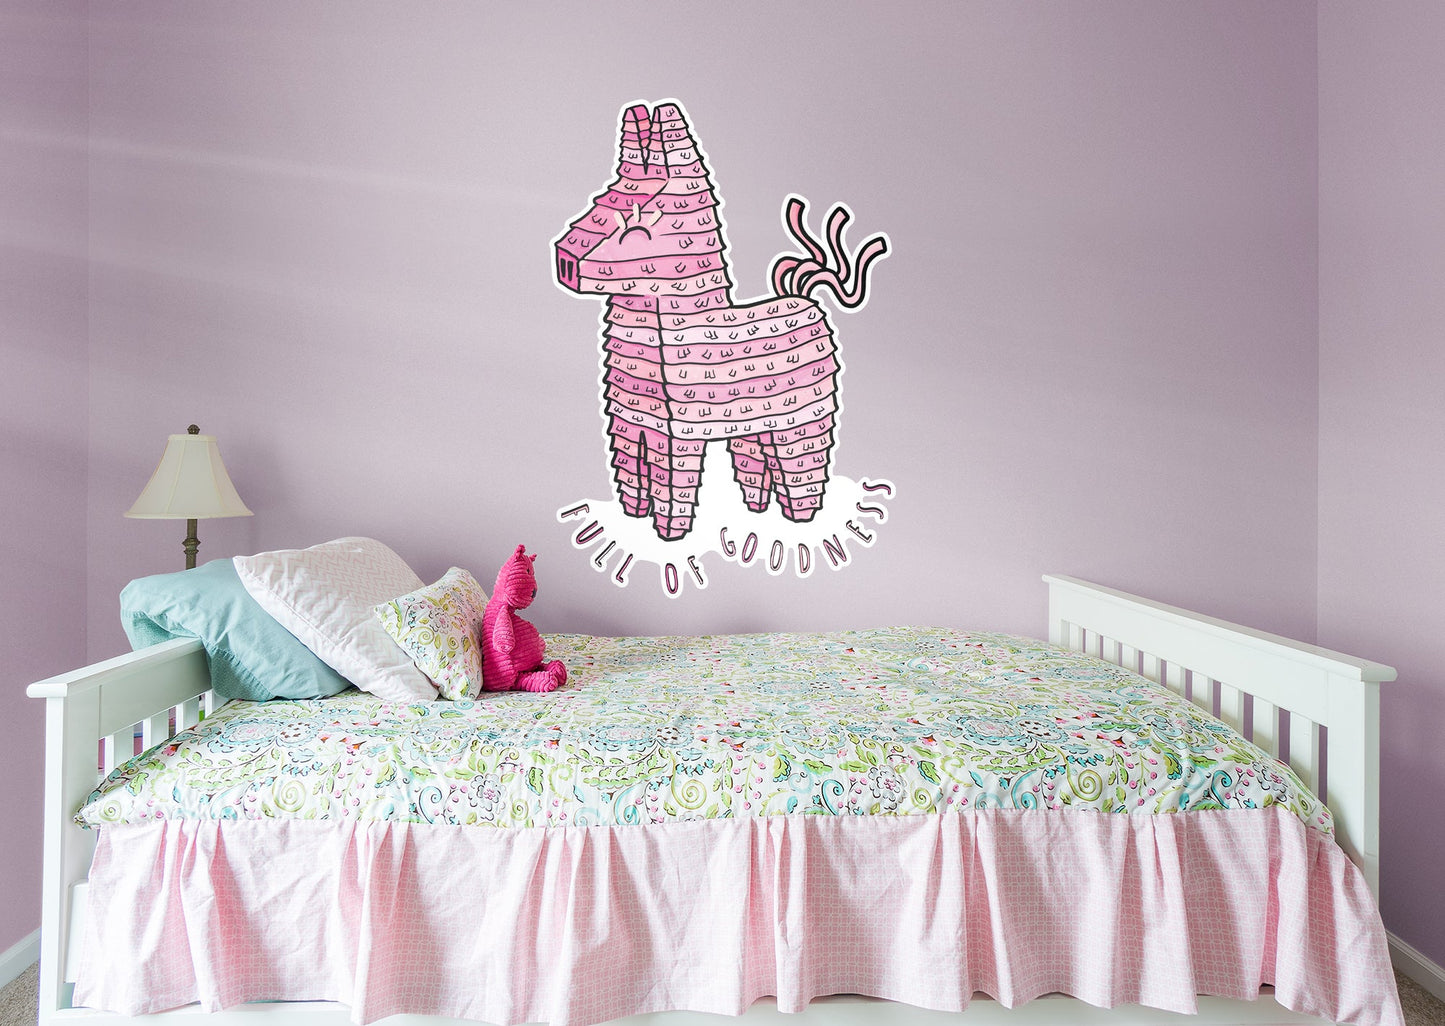 Full of Goodness Pink Pinata        - Officially Licensed Big Moods Removable     Adhesive Decal